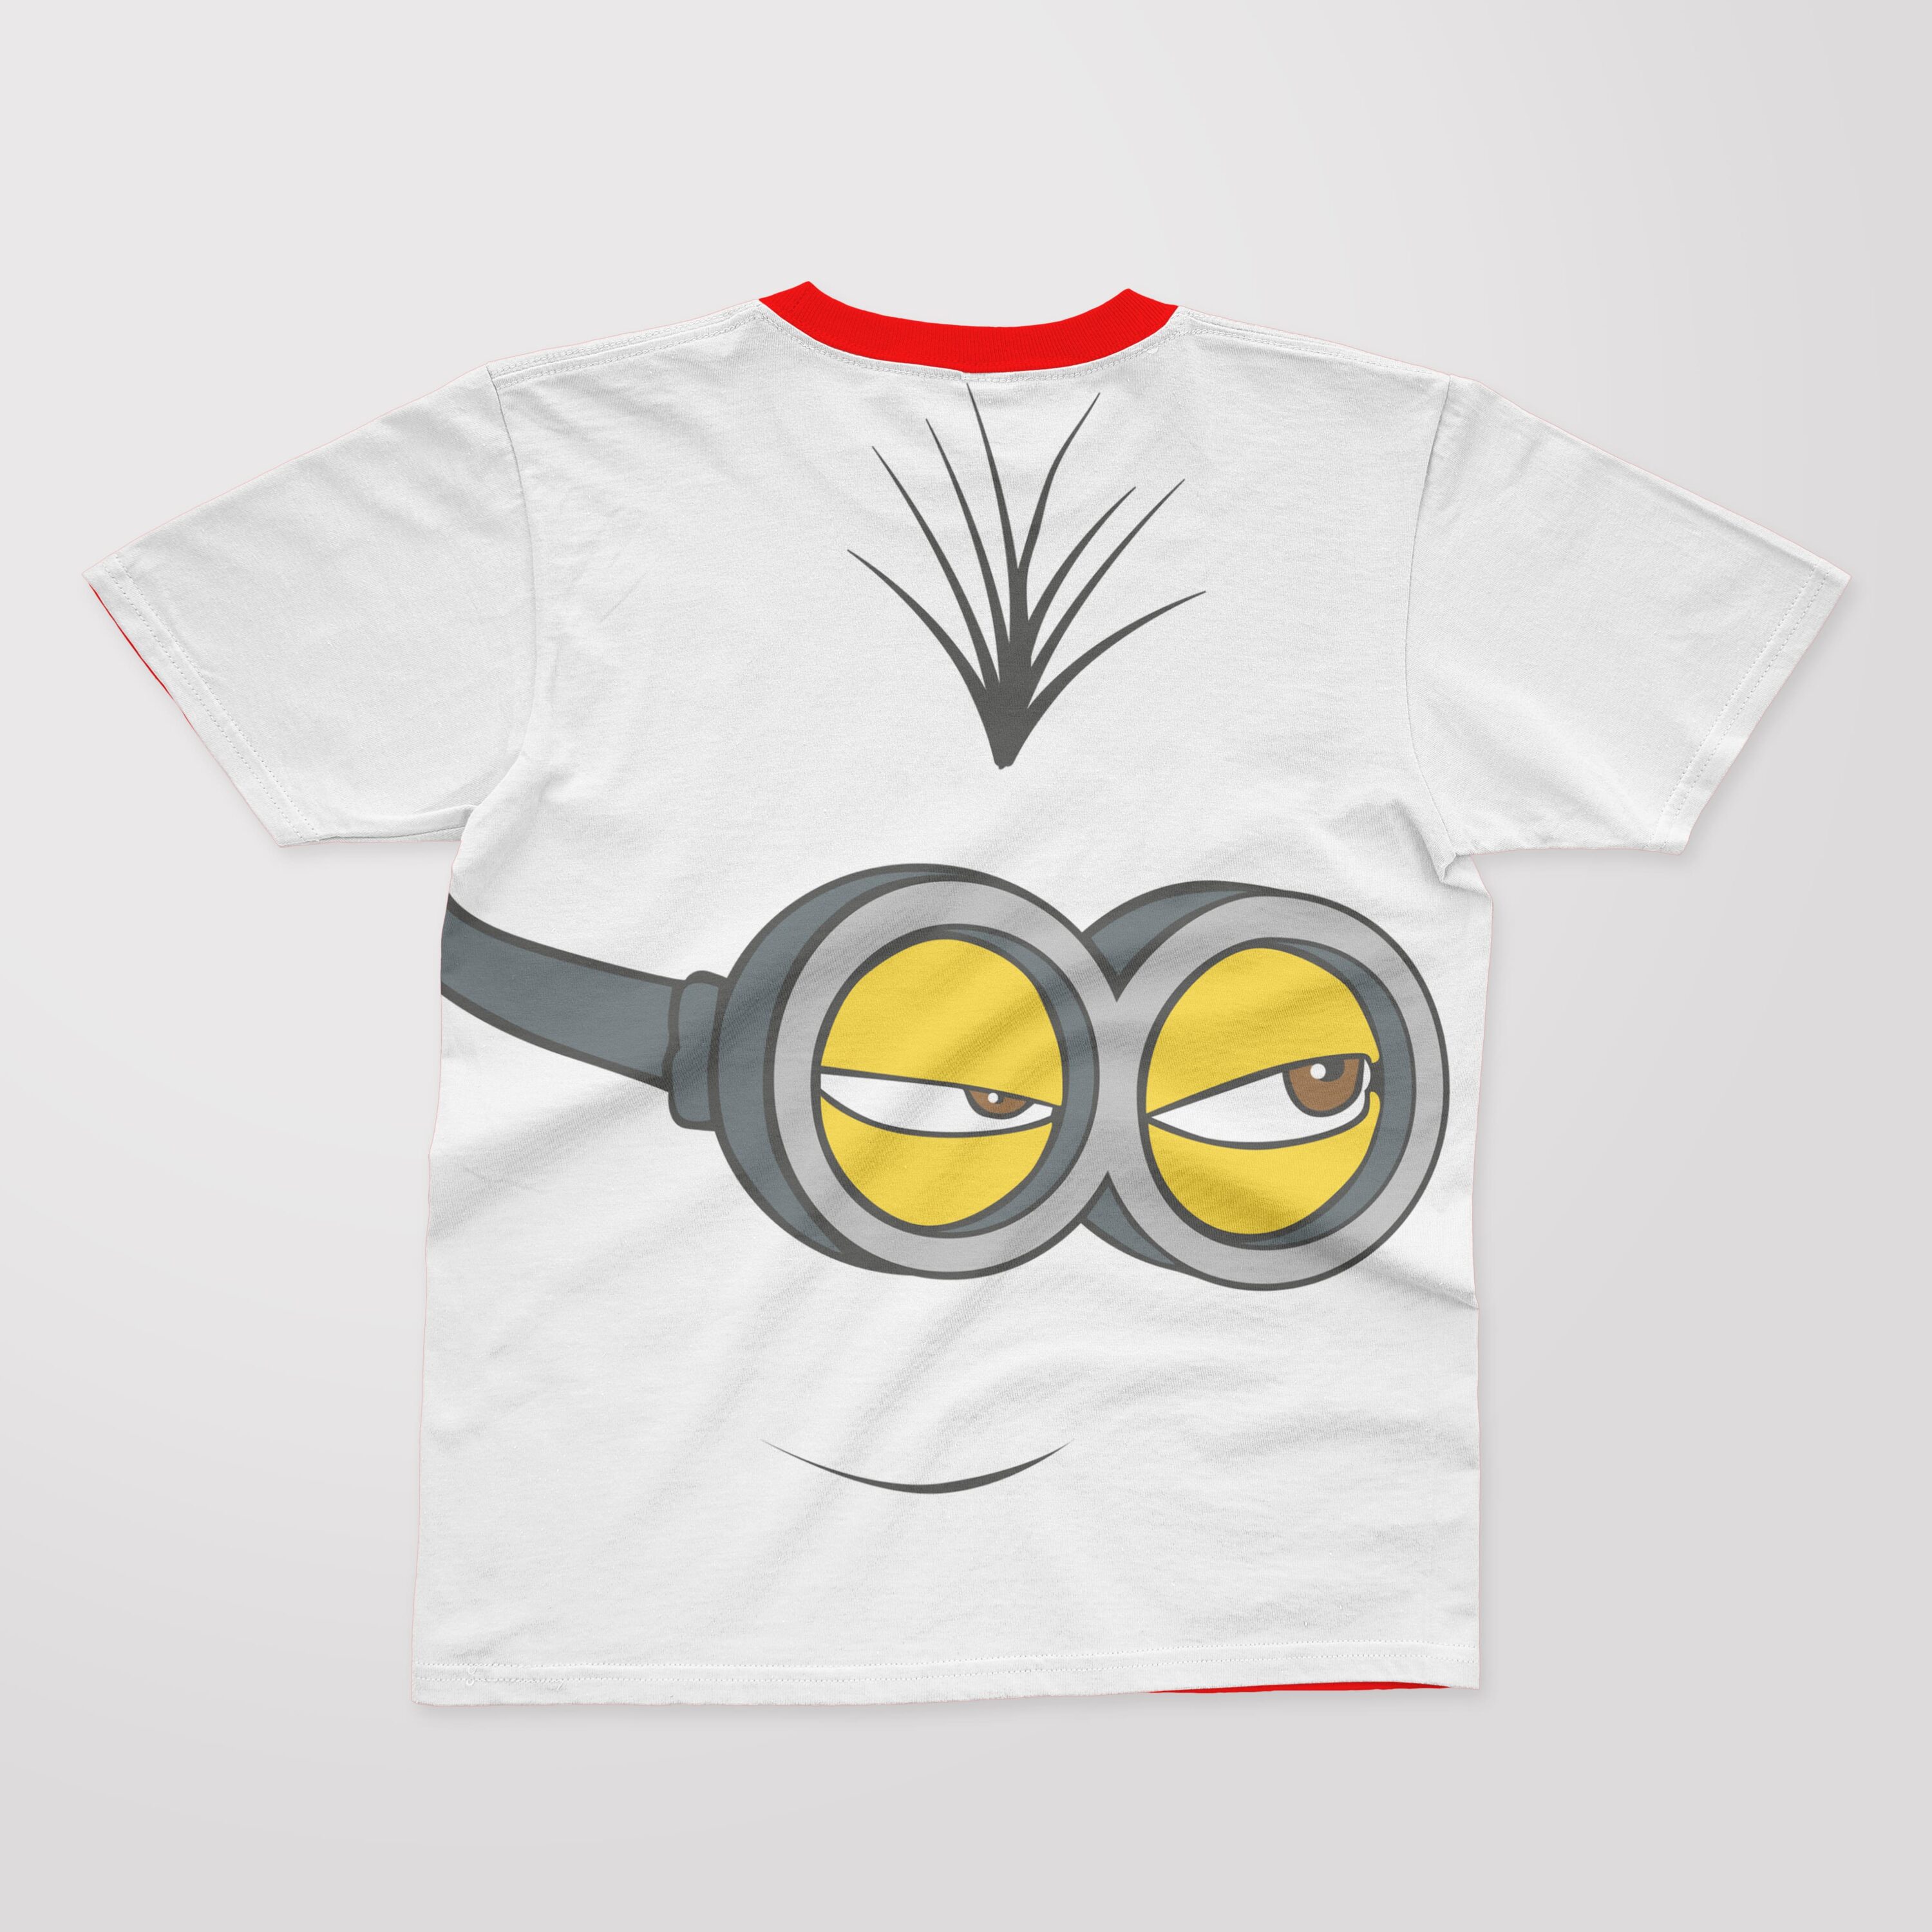 White T-shirt with a red collar and a face of a grinning minion.